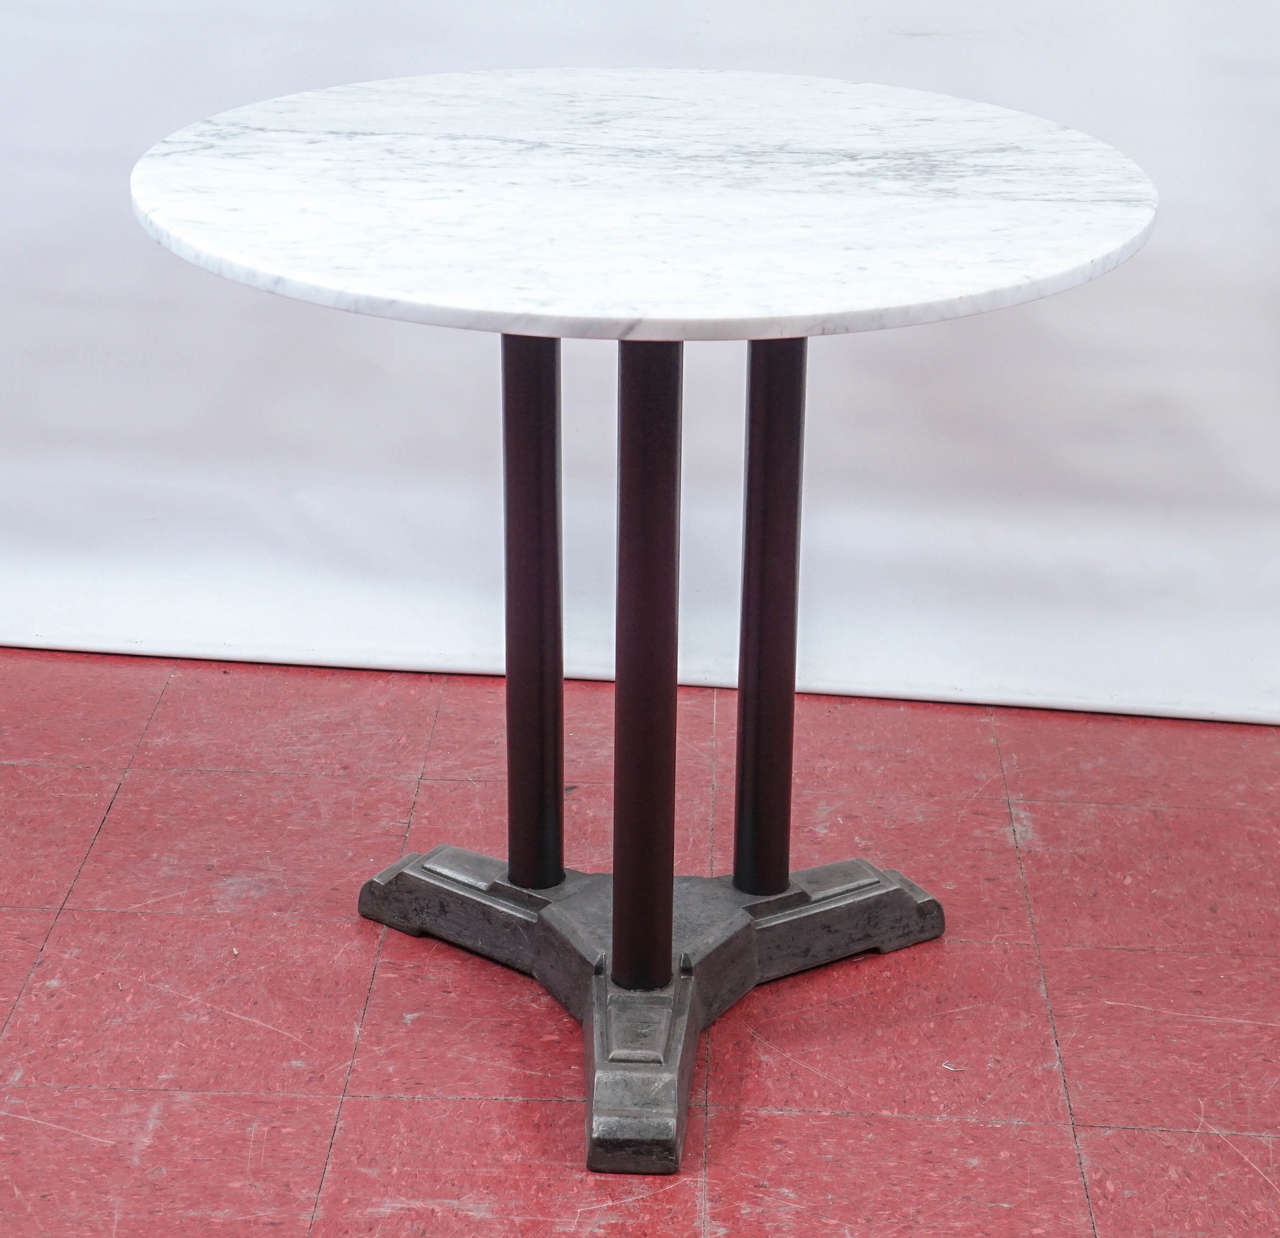 French Art Deco bistro gueridon pedestal garden or wine table with marble top. Great for a porch, small dining area in a kitchen, or small side table